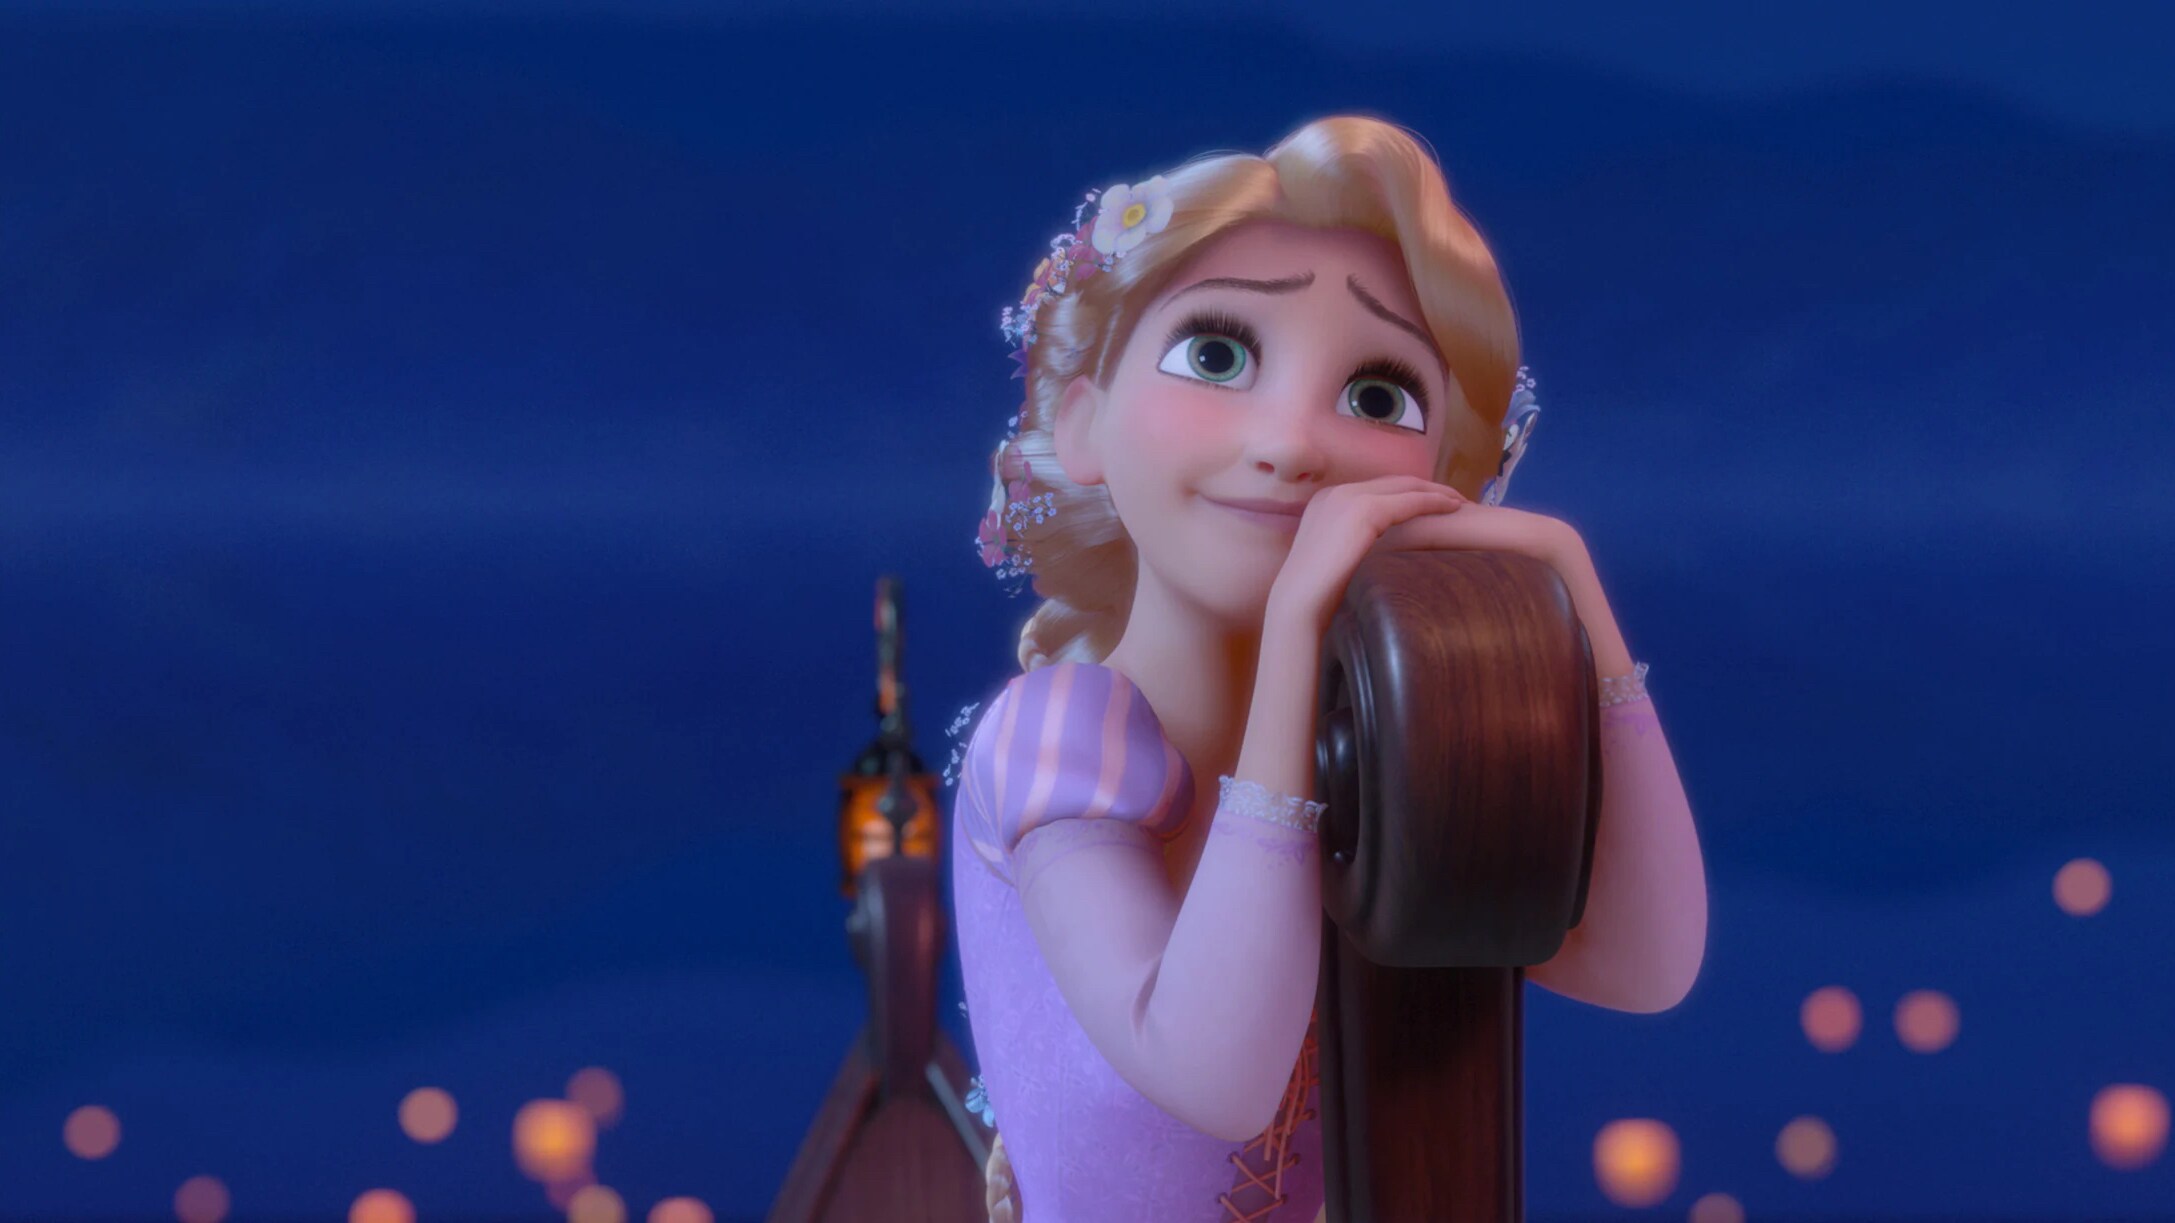 Rapunzel finally getting to see the floating lanterns.